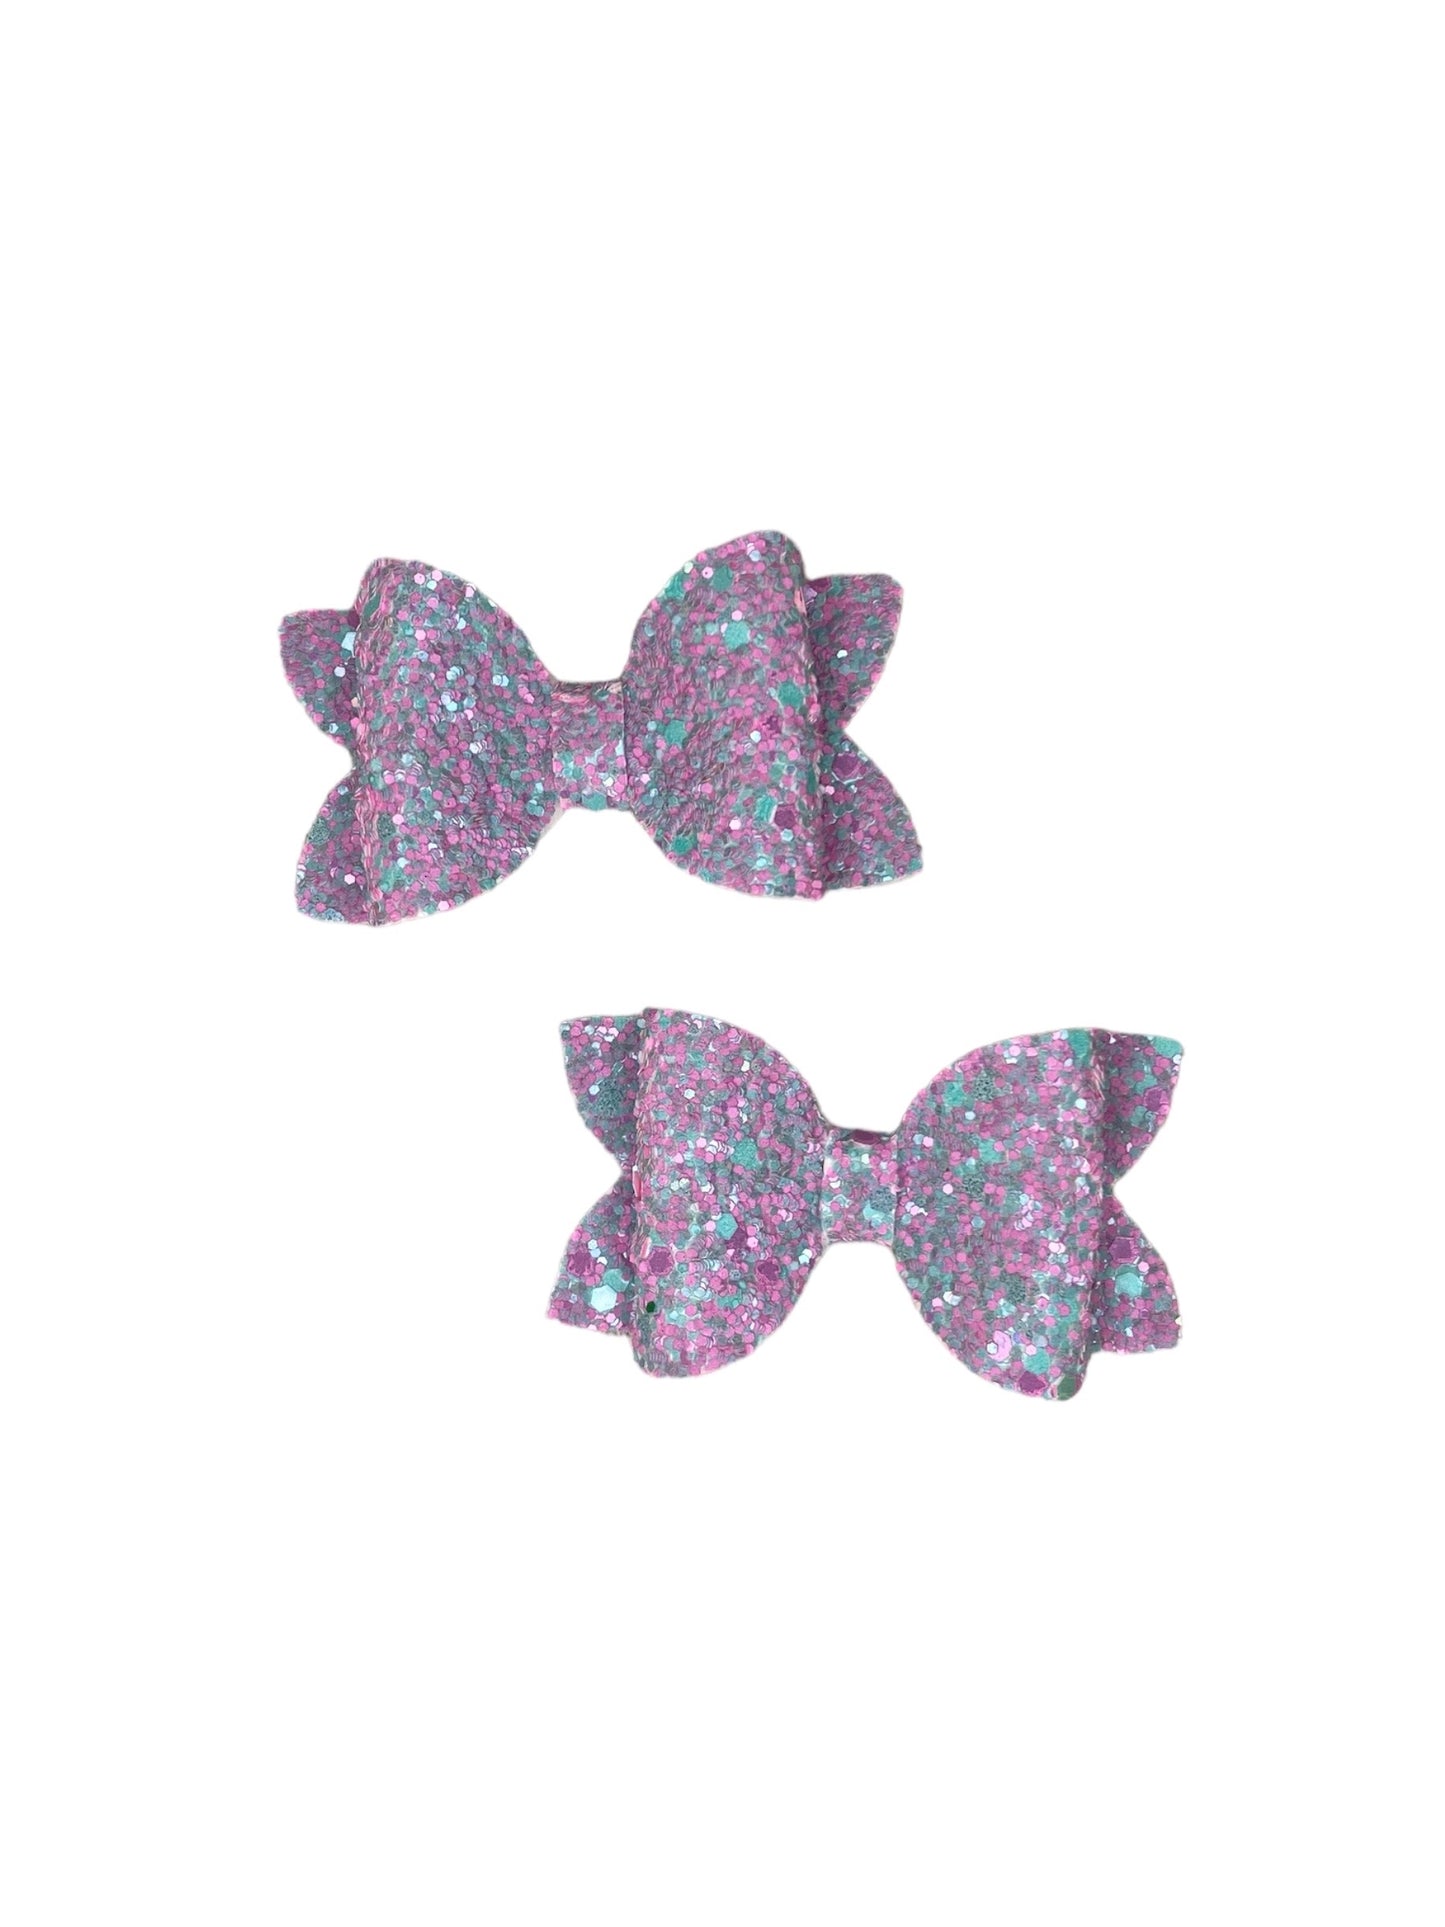 Purple and Turquoise Glitter Pigtail Bows!